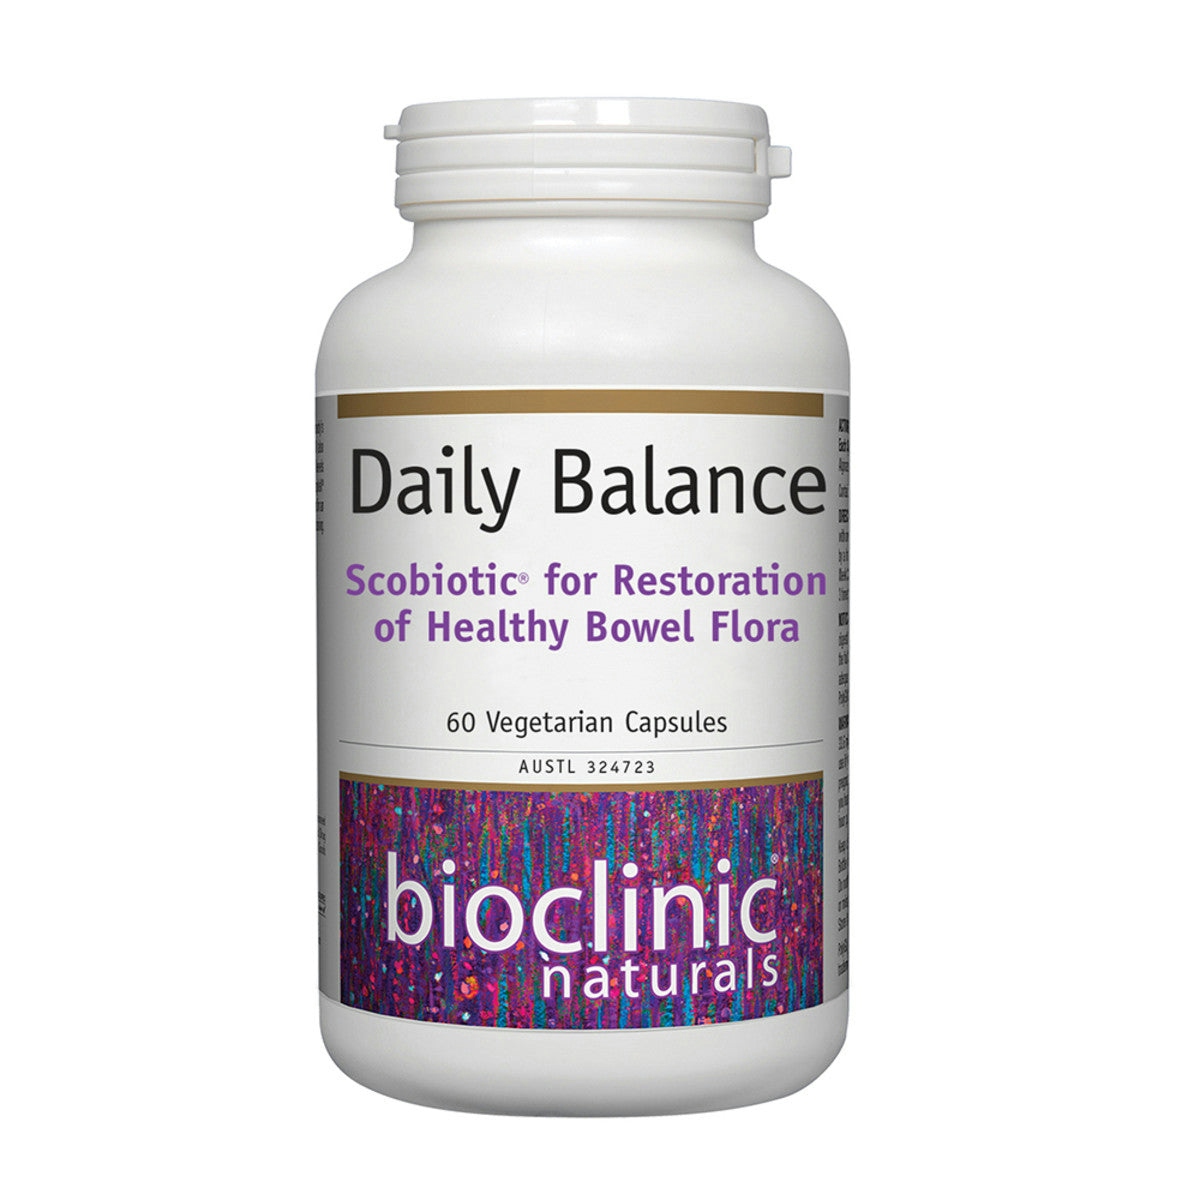 Image of Bioclinic Naturals Daily Balance 60vc with a white background